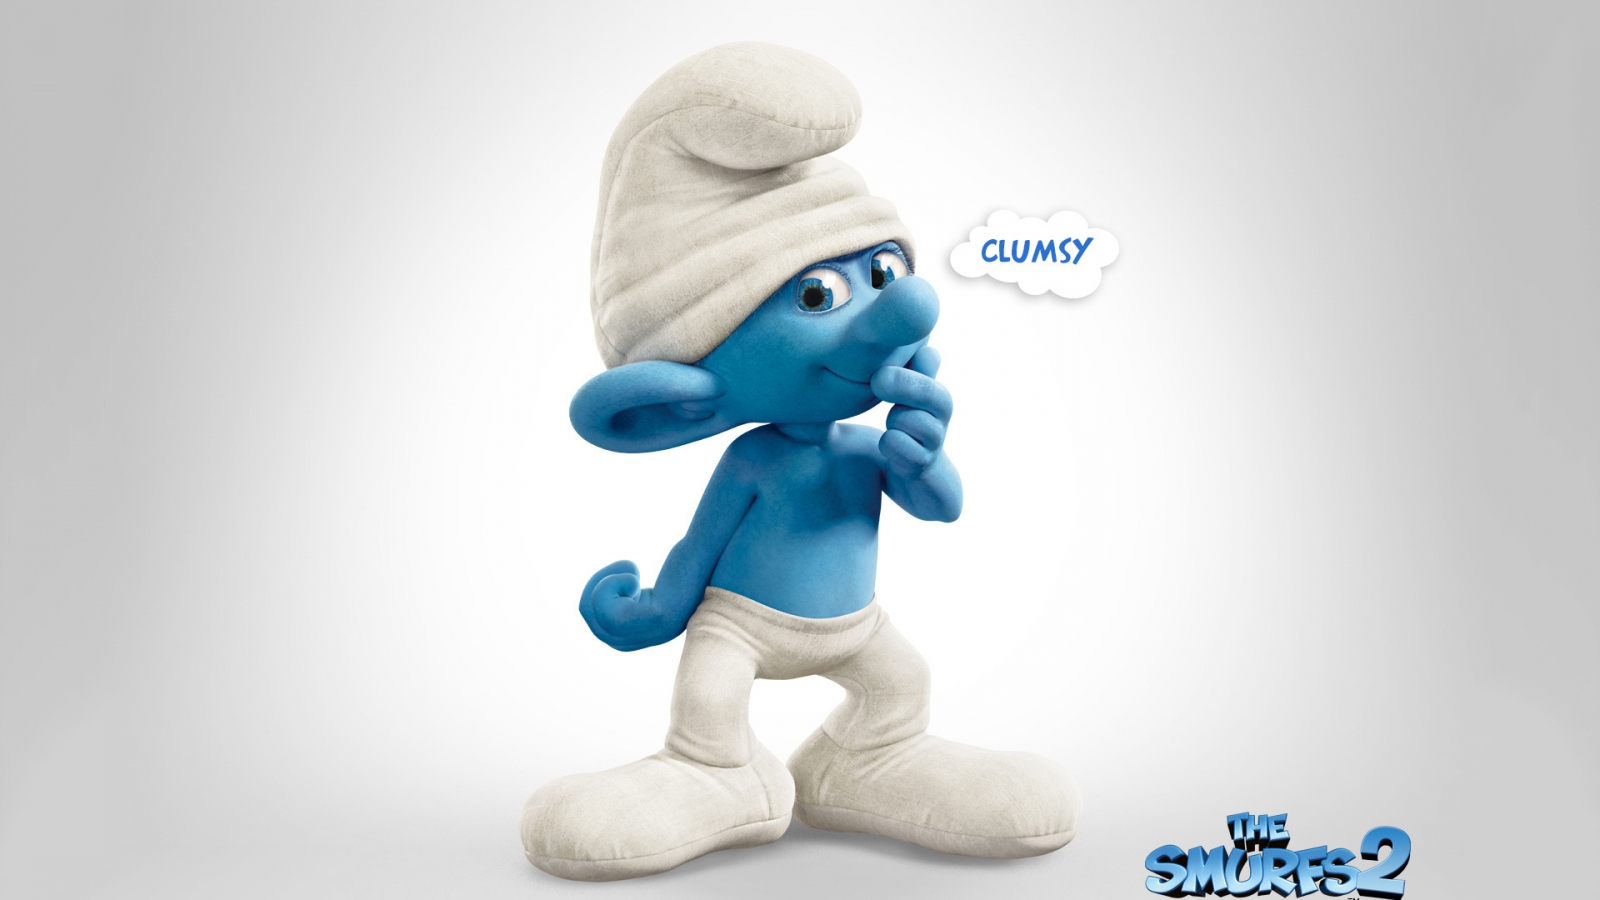 Clumsy The Smurfs 2 for 1600 x 900 HDTV resolution